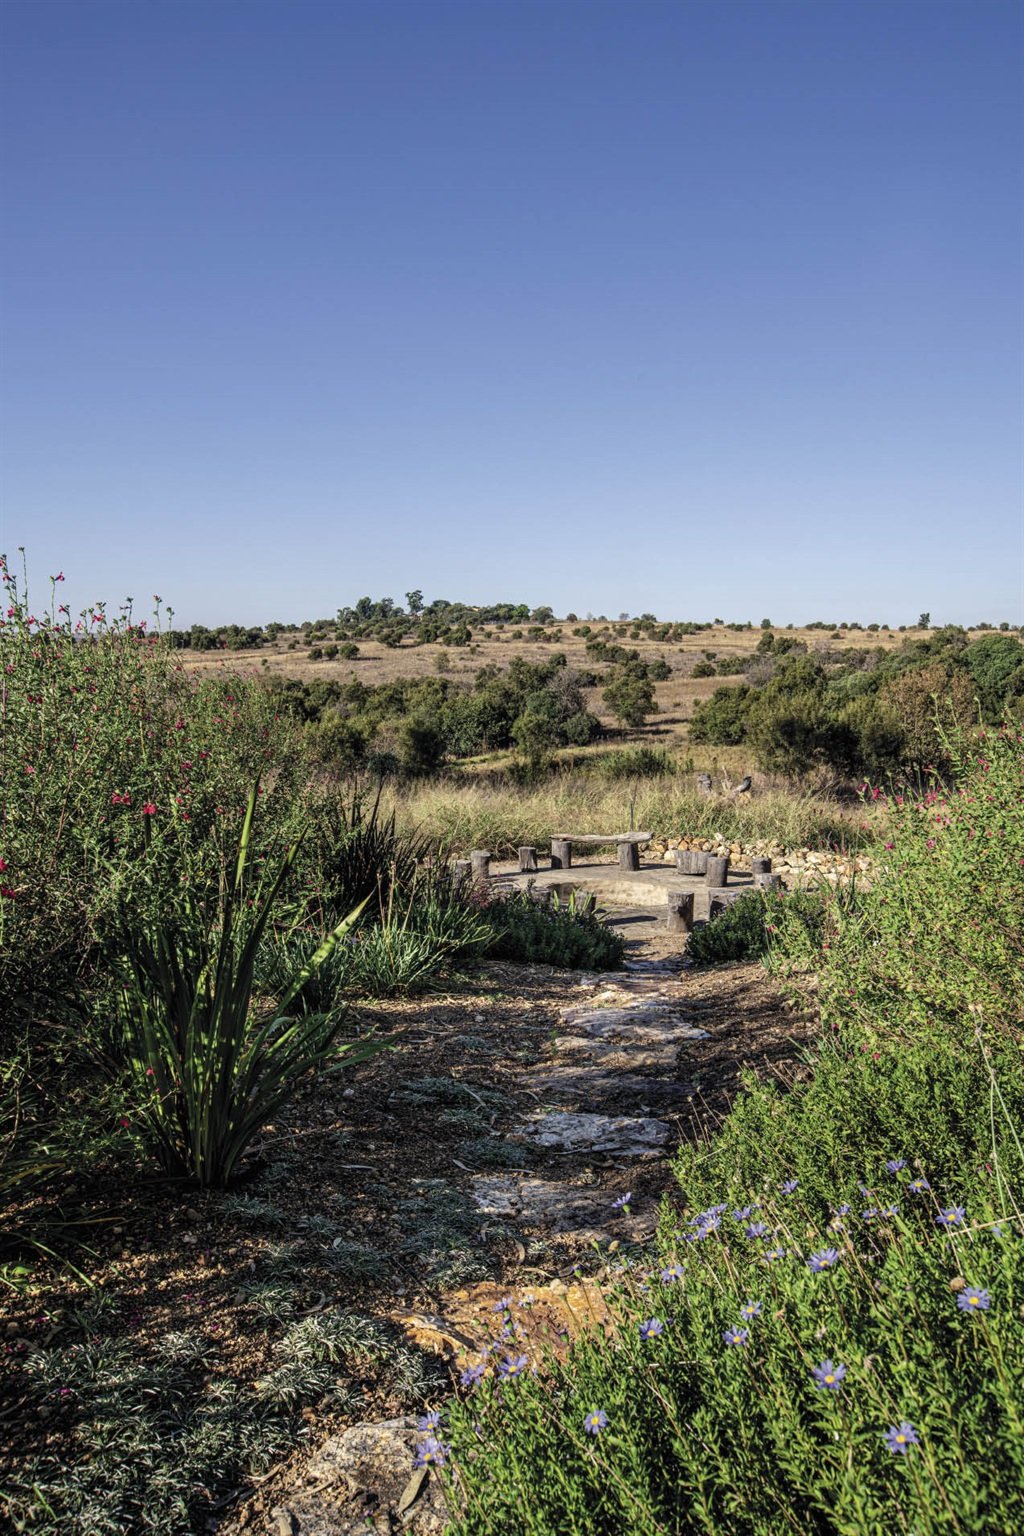 The Du Preez family love hanging out at their boma. Grasses and mauve nemesias that were growing here influenced the style of plants chosen; these include watsonia, aloe, red-hot poker and wild garlic. Gazania rigens with its silver-grey foliage was added later to stabilise the soil of the embankment. Stones from the veld were used to create the sloping pathway down to the boma. Blue felicias provide colour next to the pathway; they attract bees, birds and butterflies to the garden. 